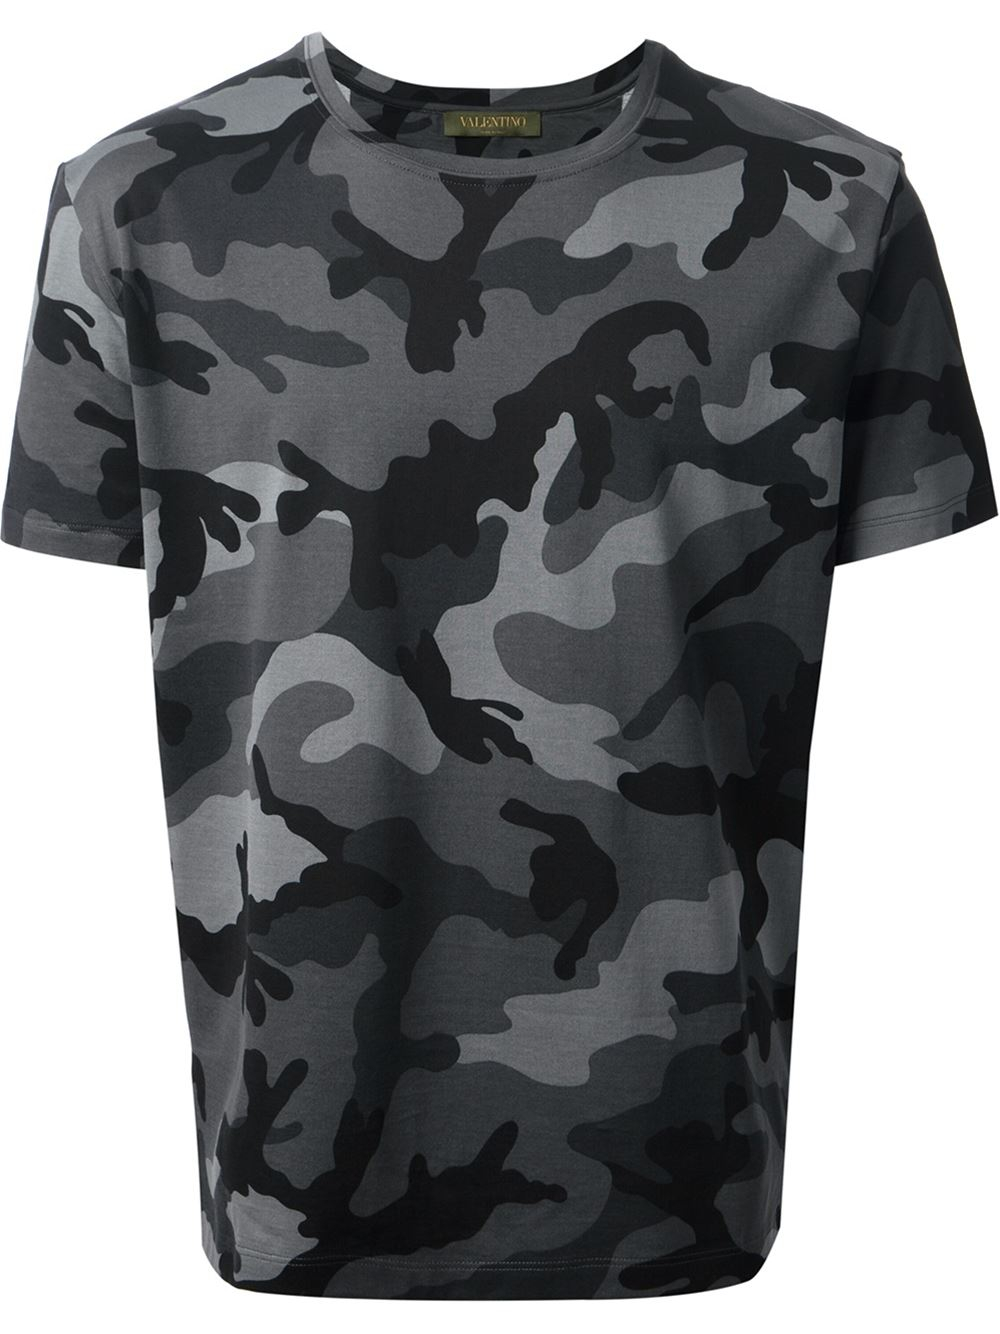 Valentino Camouflage T-Shirt in Grey (Gray) for Men - Lyst